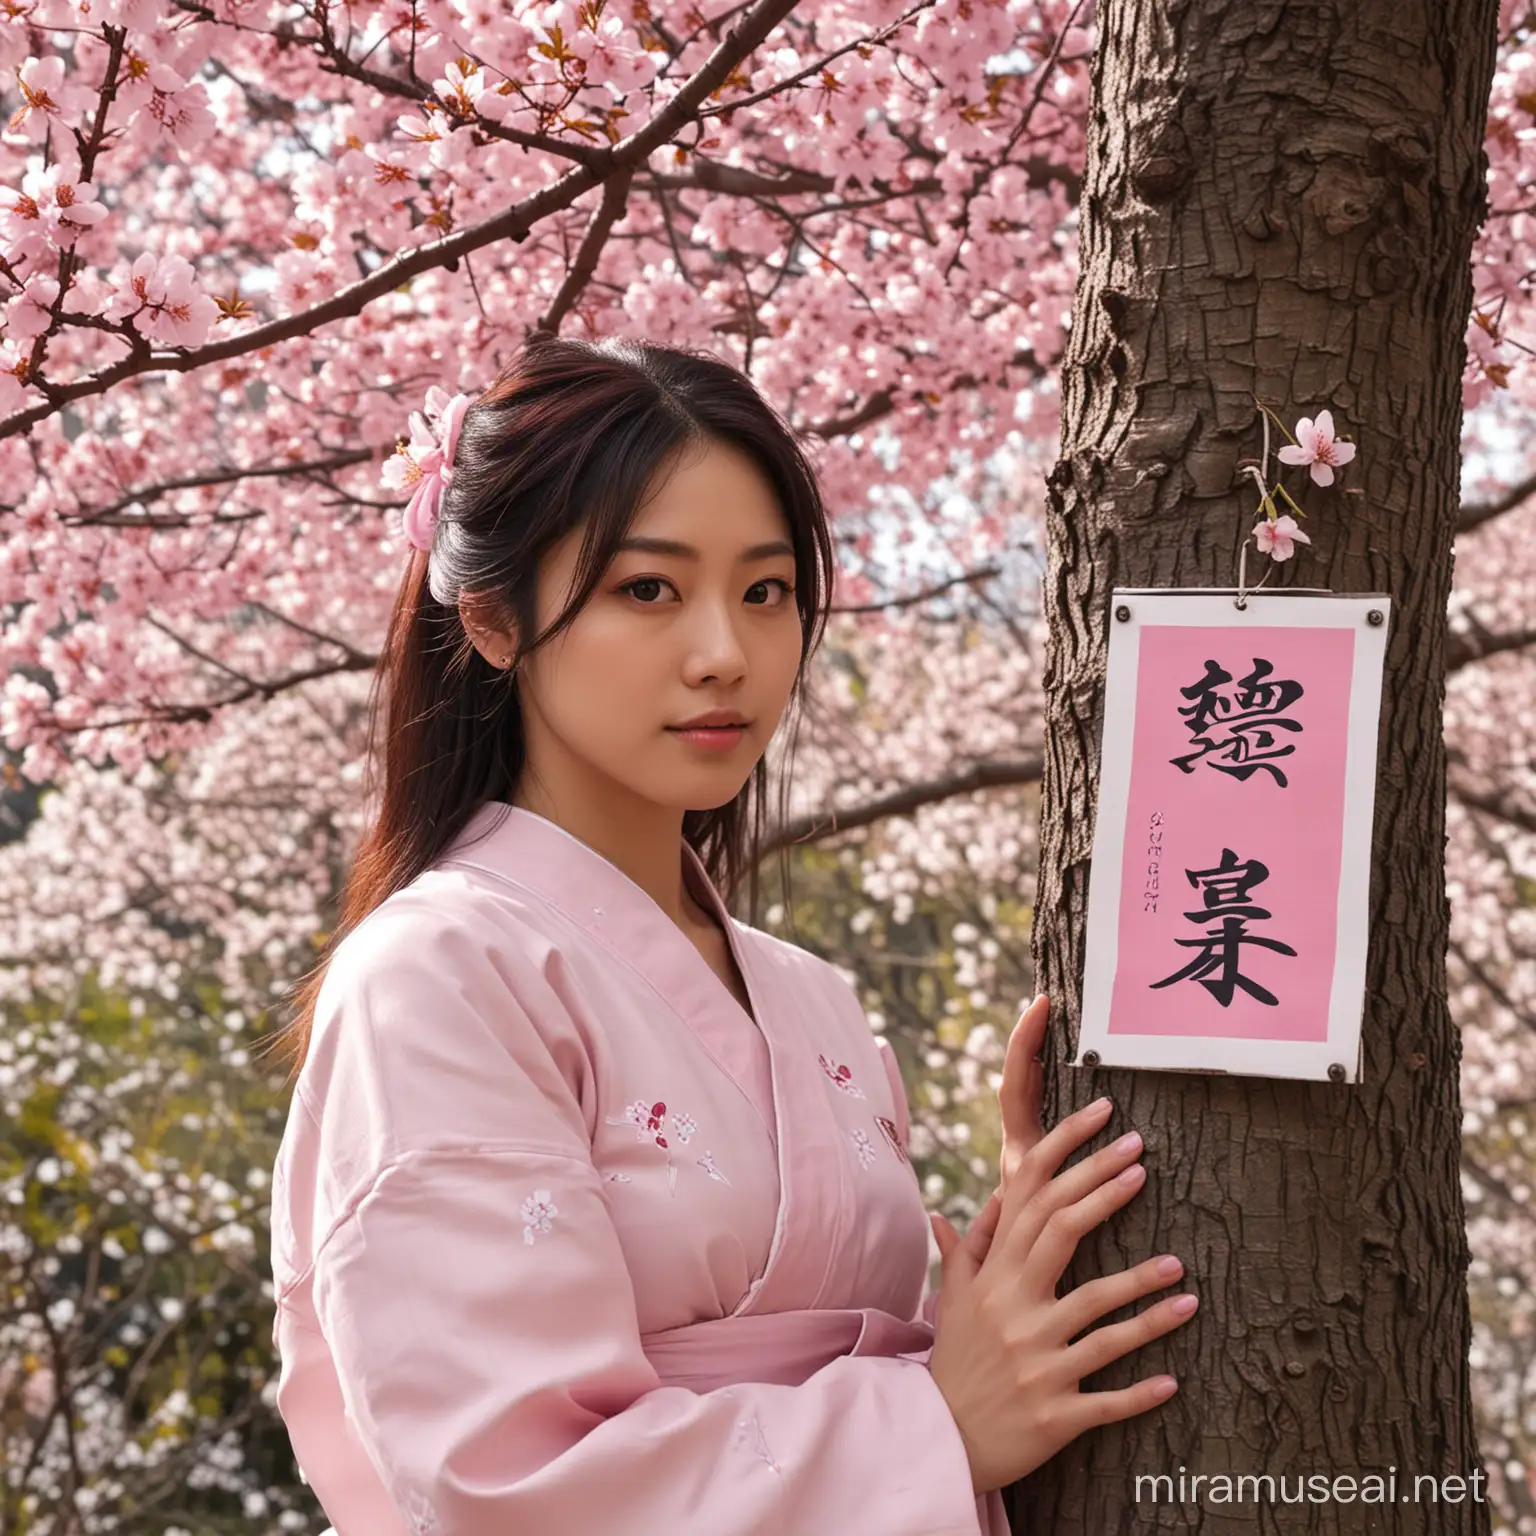 Sitting forwards with leg crossed over.The image shows pink and white signs hanging on a tree. The signs are written in Japanese characters "國黒川桜まつり" and "目黒川桜まつり." The tags for this image include flower, tree, sakura, blossom, outdoor, cherry blossom, pink, magenta, sign, and spring.Black woman beautiful face is shown.  The woman's body parts such as chest, thigh, stomach, and abdomen are visible.painterly smooth, extremely sharp detail, finely tuned detail, 8 k, ultra sharp focus, illustration, illustration, art by Ayami Kojima Beautiful Thick Black